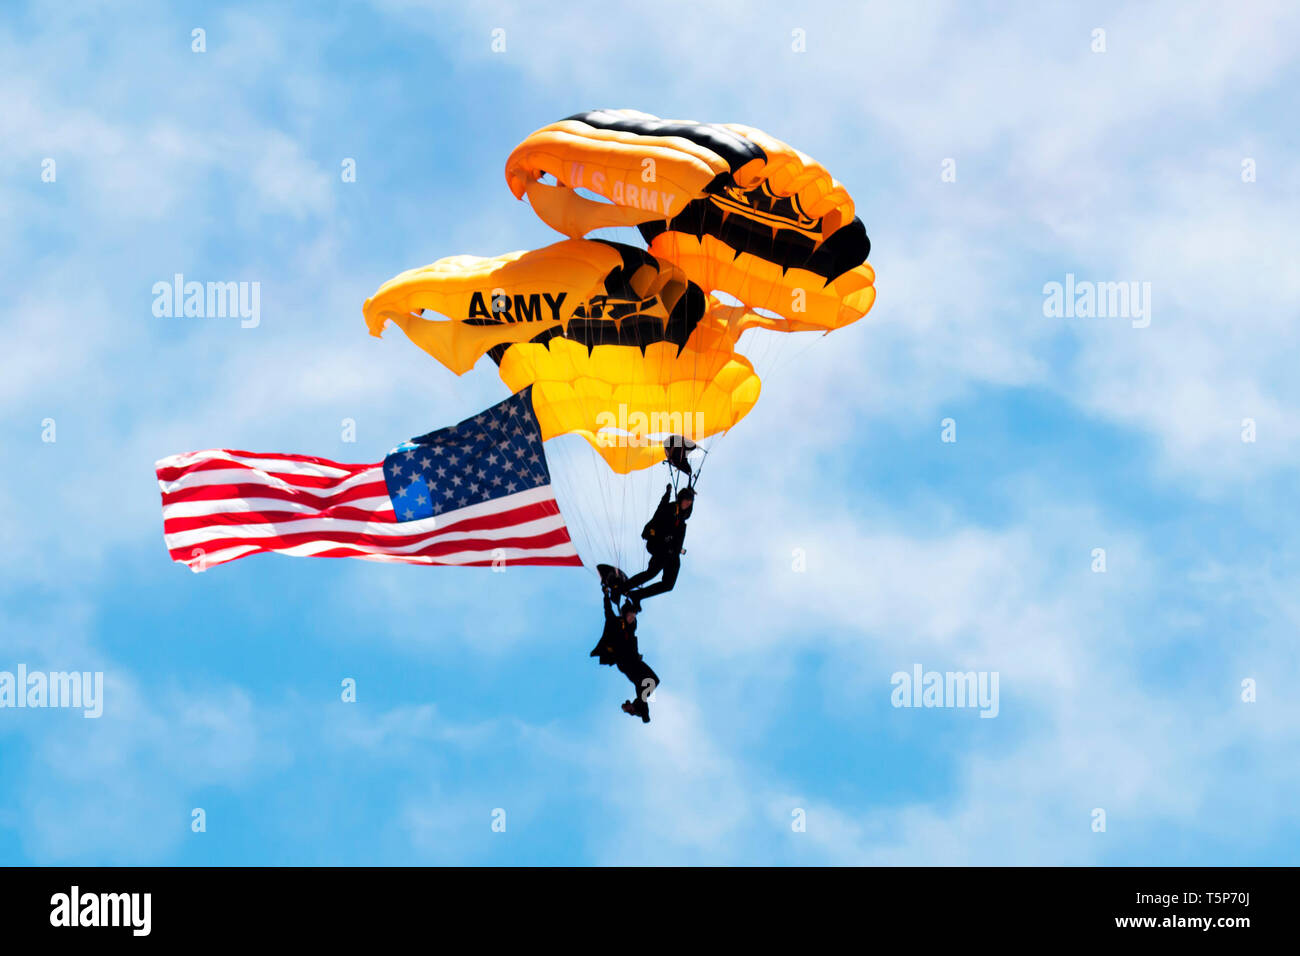 Wantagh, NY, United States - 26 May 2017: US Army paratroopers carrying the american flag open up the practice show for the air show. Stock Photo